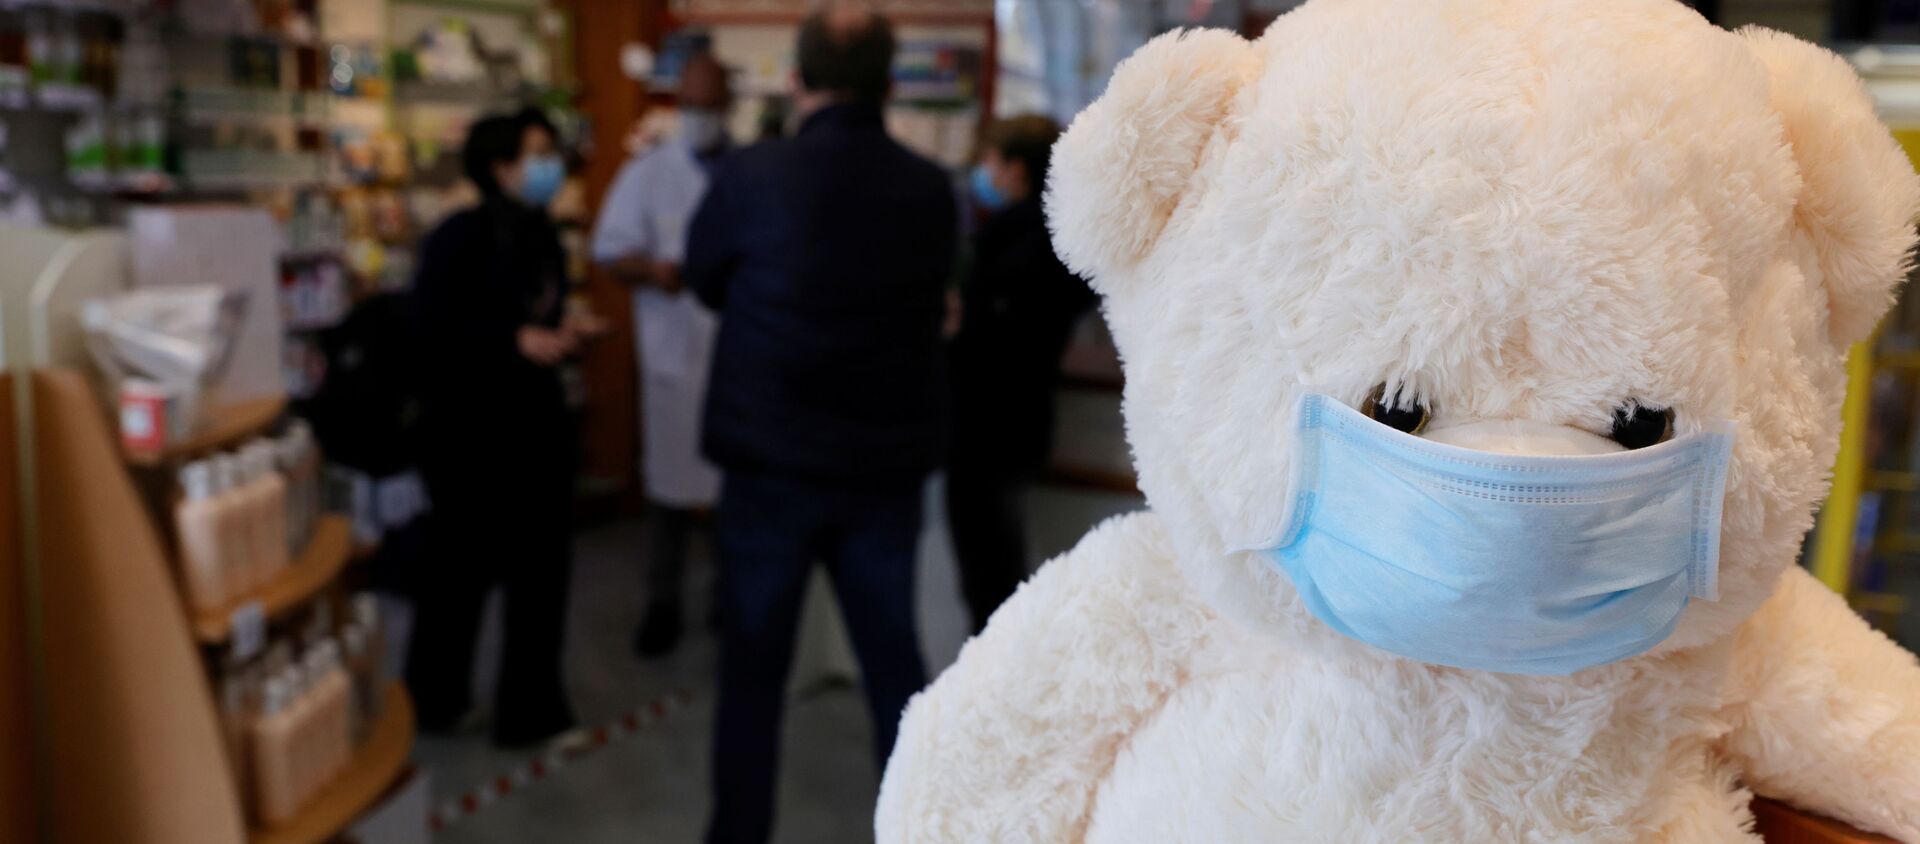 A teddy bear, wearing a protective face mask, is seen in a pharmacy in Gouzeaucourt amid the coronavirus disease (COVID-19) outbreak in France, February 25, 2021. - Sputnik International, 1920